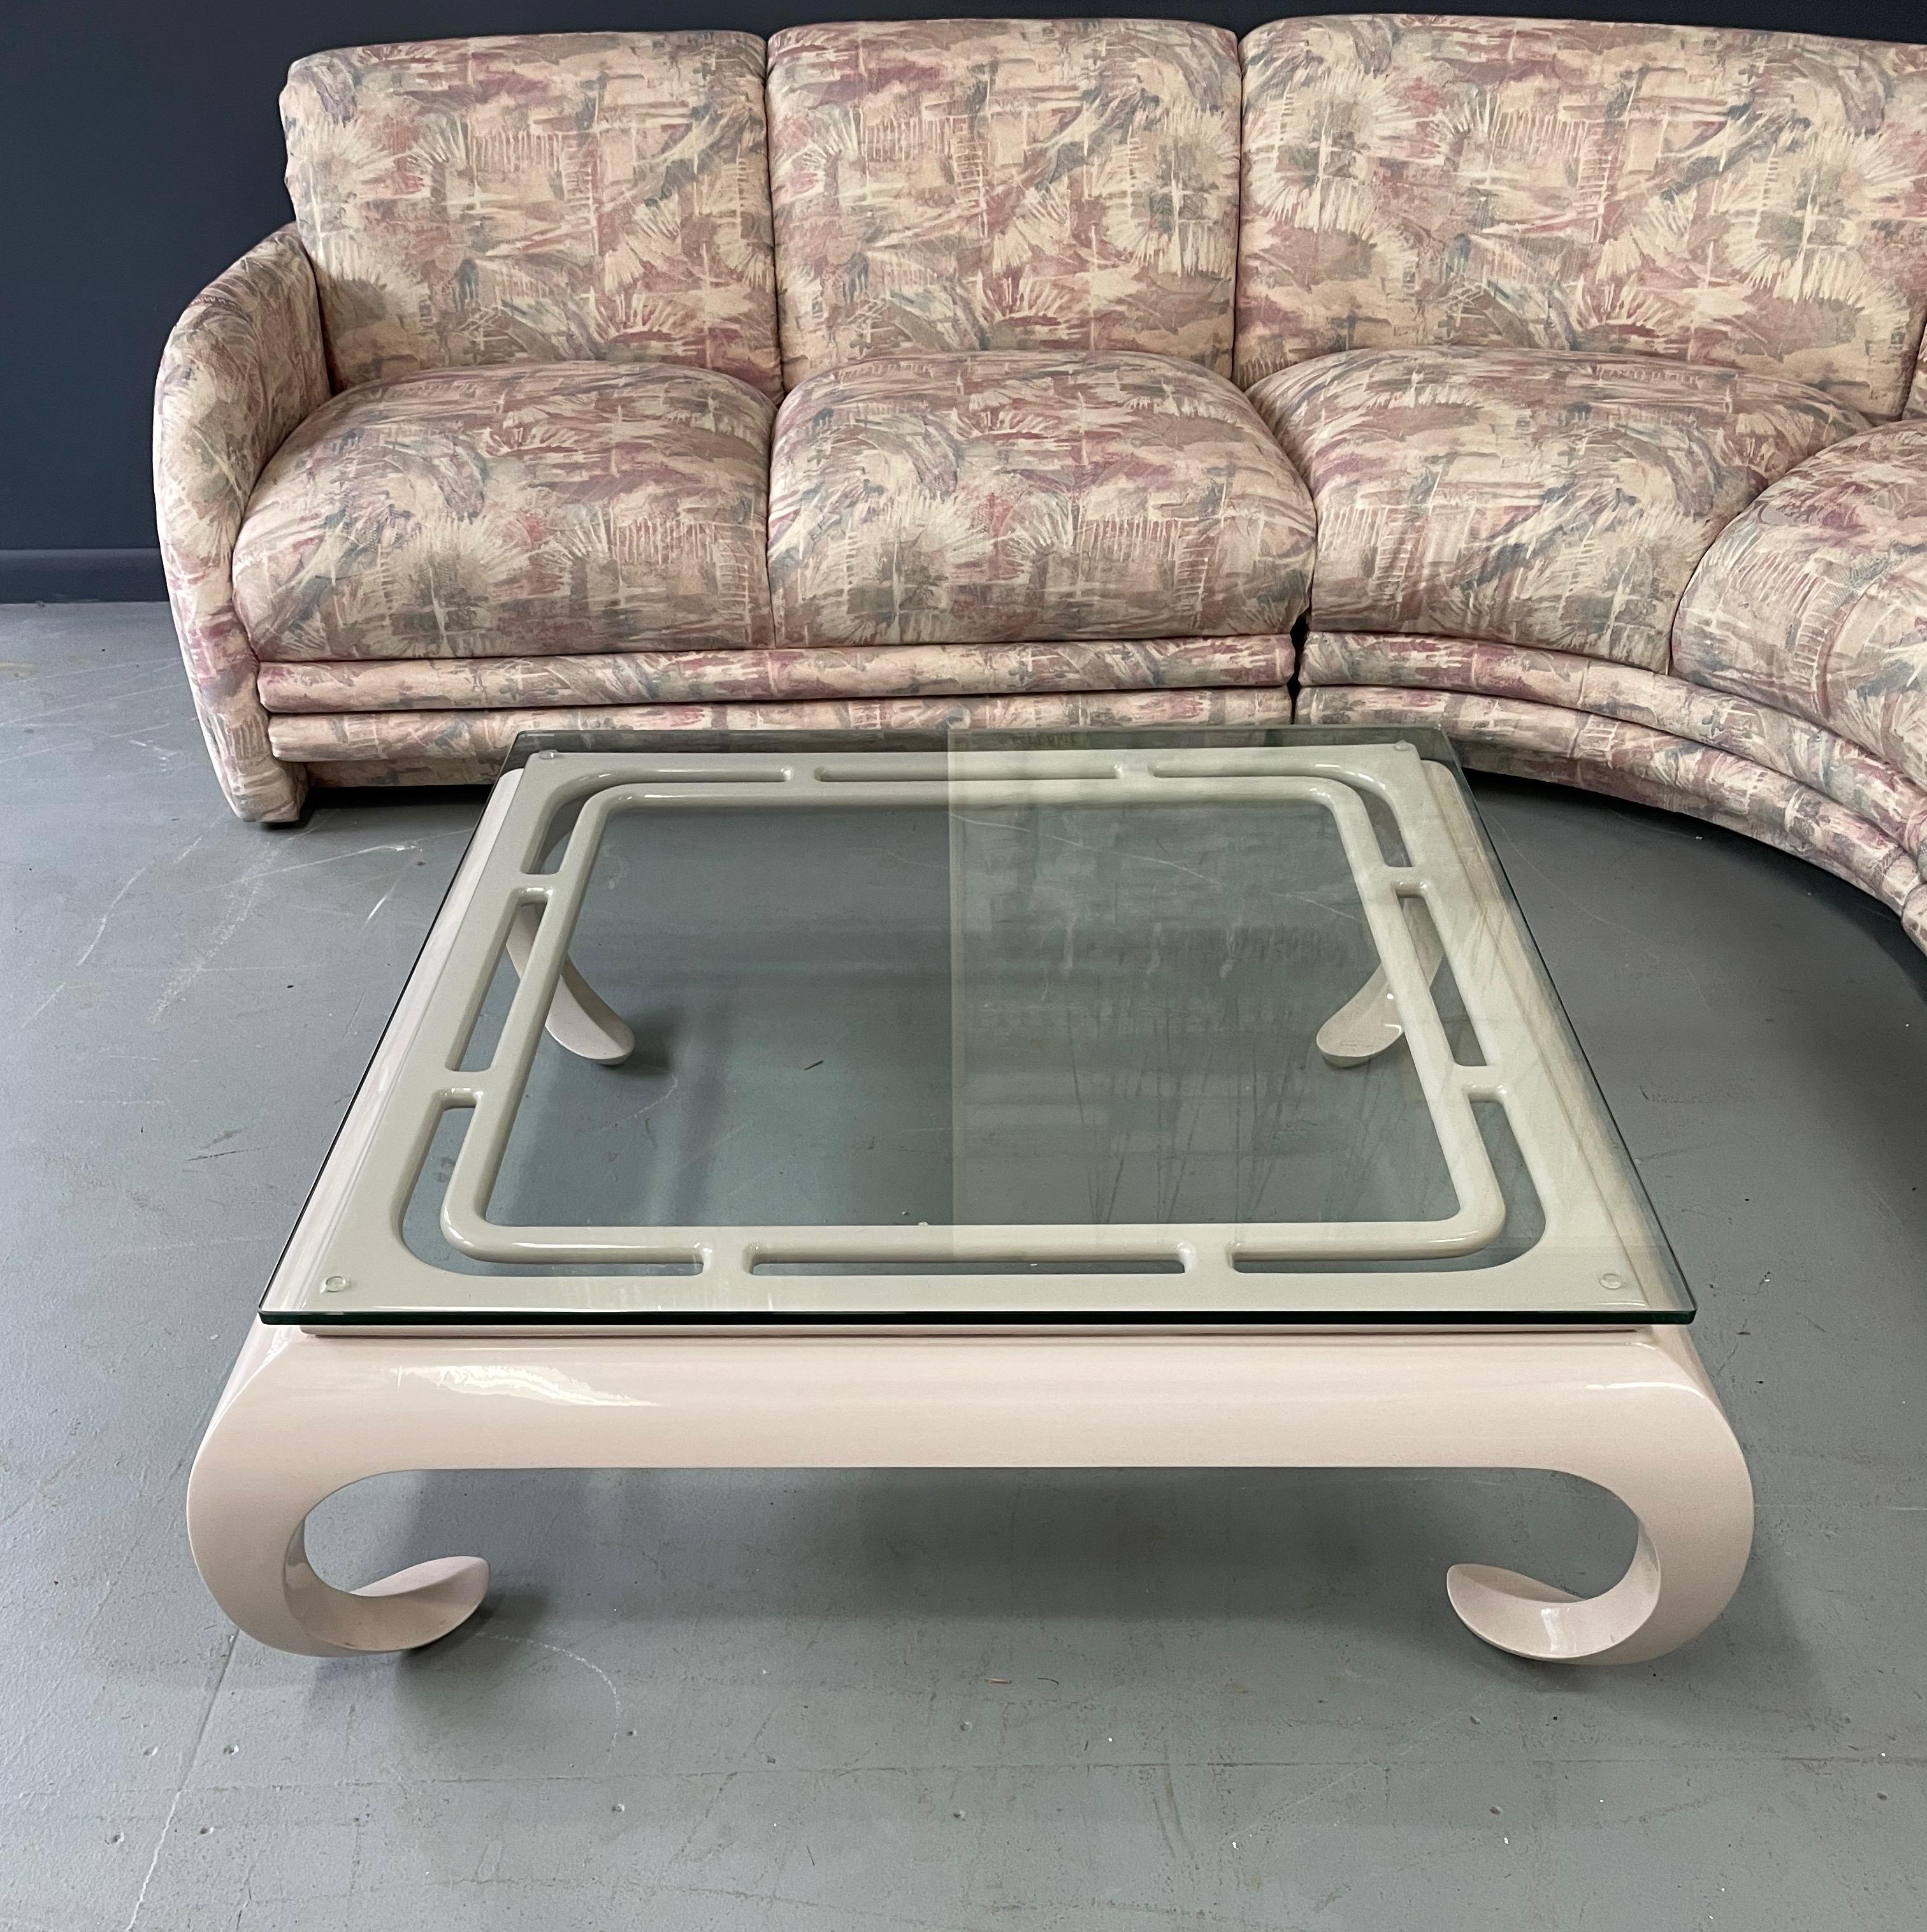 Hollywood Regency Lacquered Asian Influenced Coffee Table in Dusty Rose In Good Condition For Sale In Philadelphia, PA